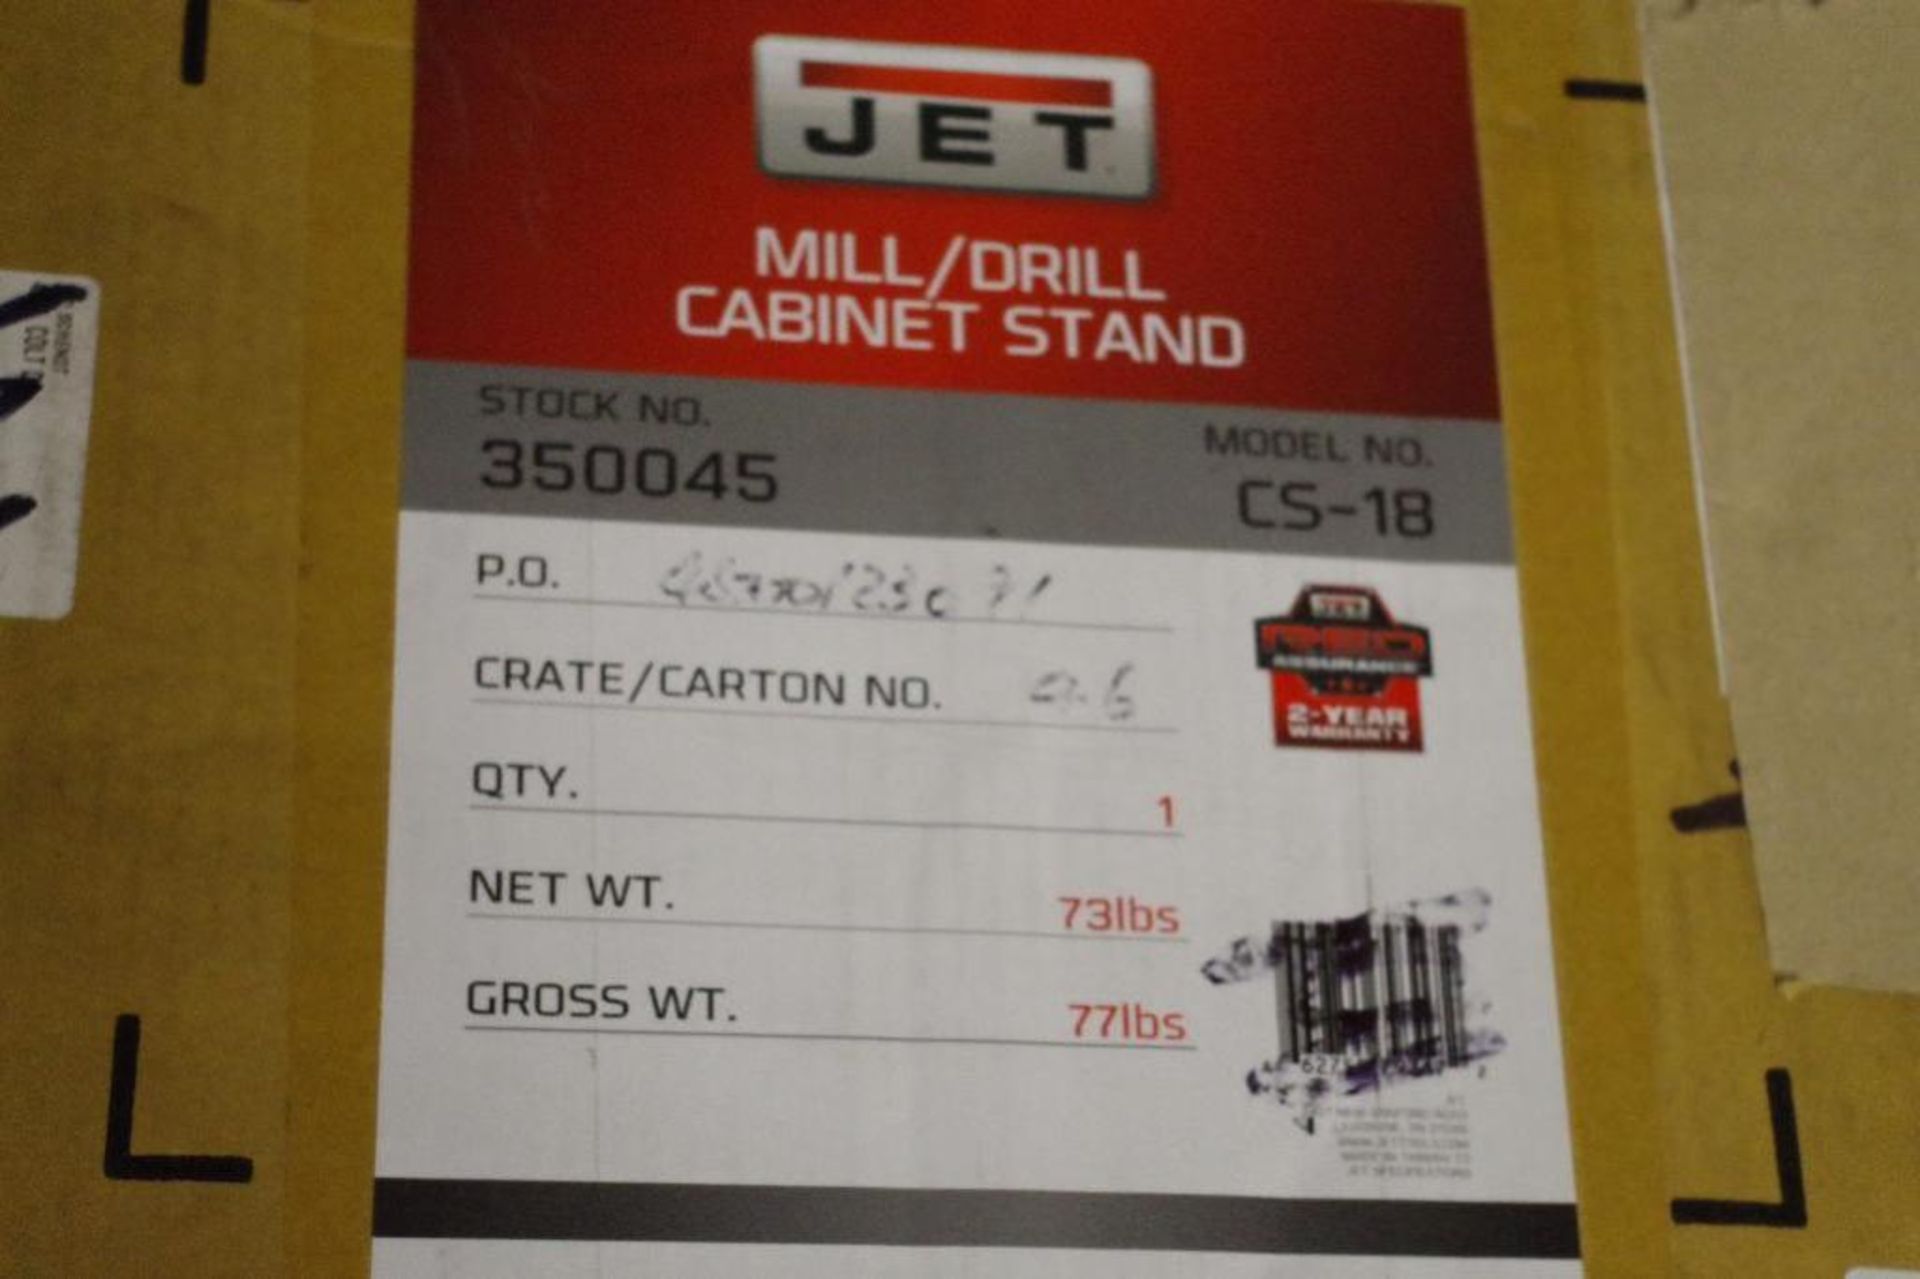 UNUSED JET Floor Stand for Mill/Drill Cabinet - Image 3 of 3